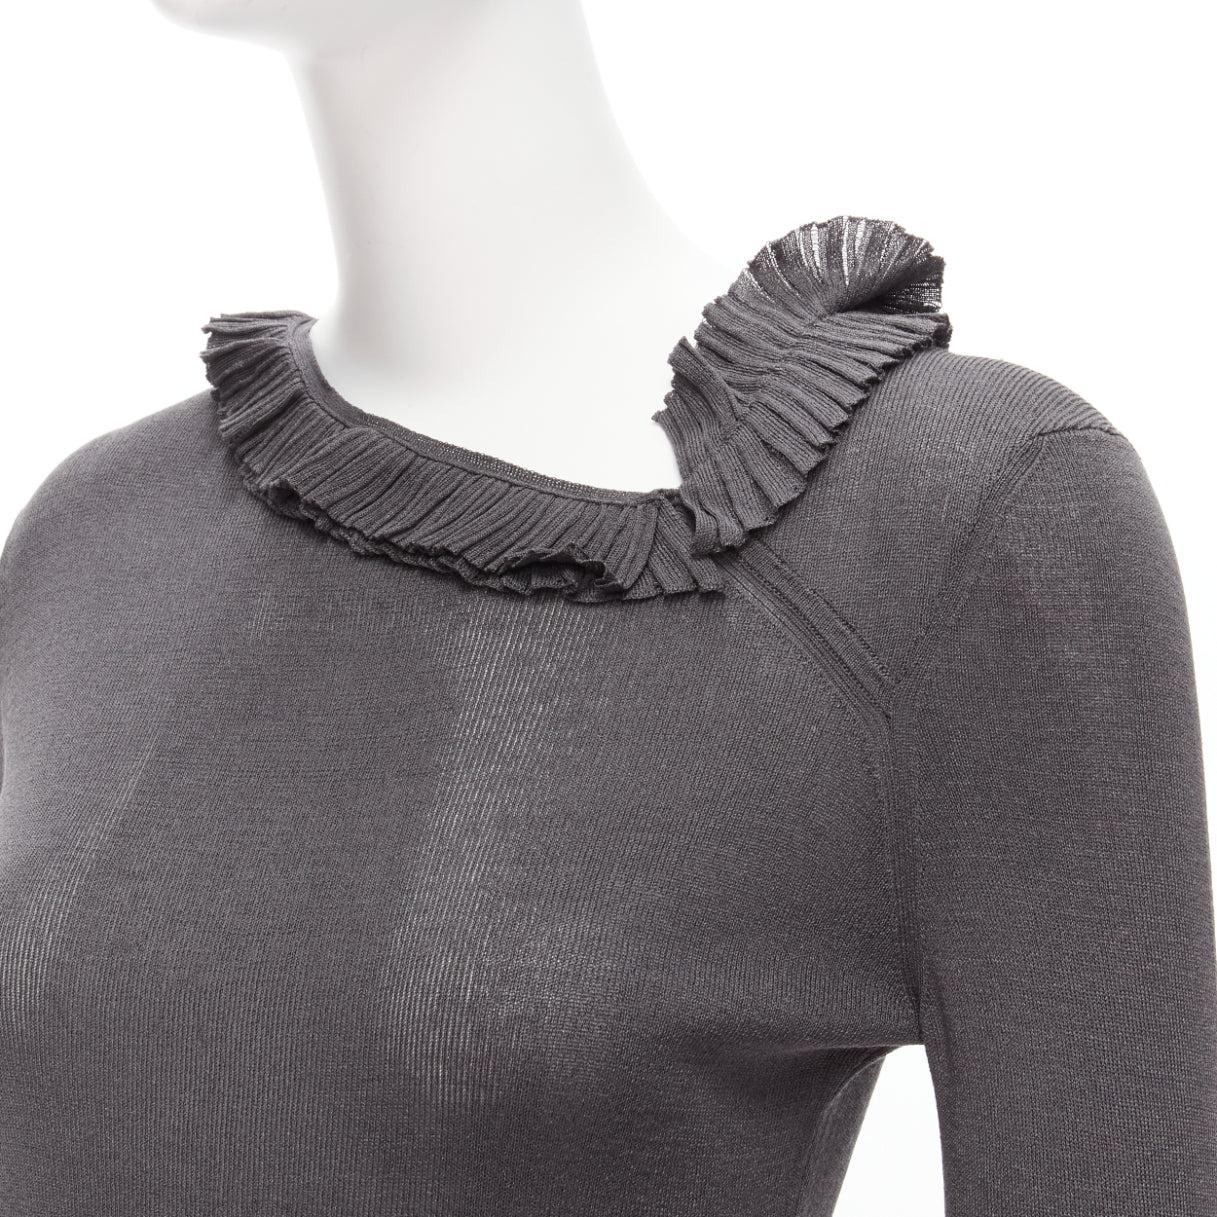 GUCCI 100% silk grey asymmetric ruffle collar long sleeve top IT44 L
Reference: GIYG/A00333
Brand: Gucci
Material: Silk
Color: Grey
Pattern: Solid
Closure: Pullover
Made in: Italy

CONDITION:
Condition: Excellent, this item was pre-owned and is in